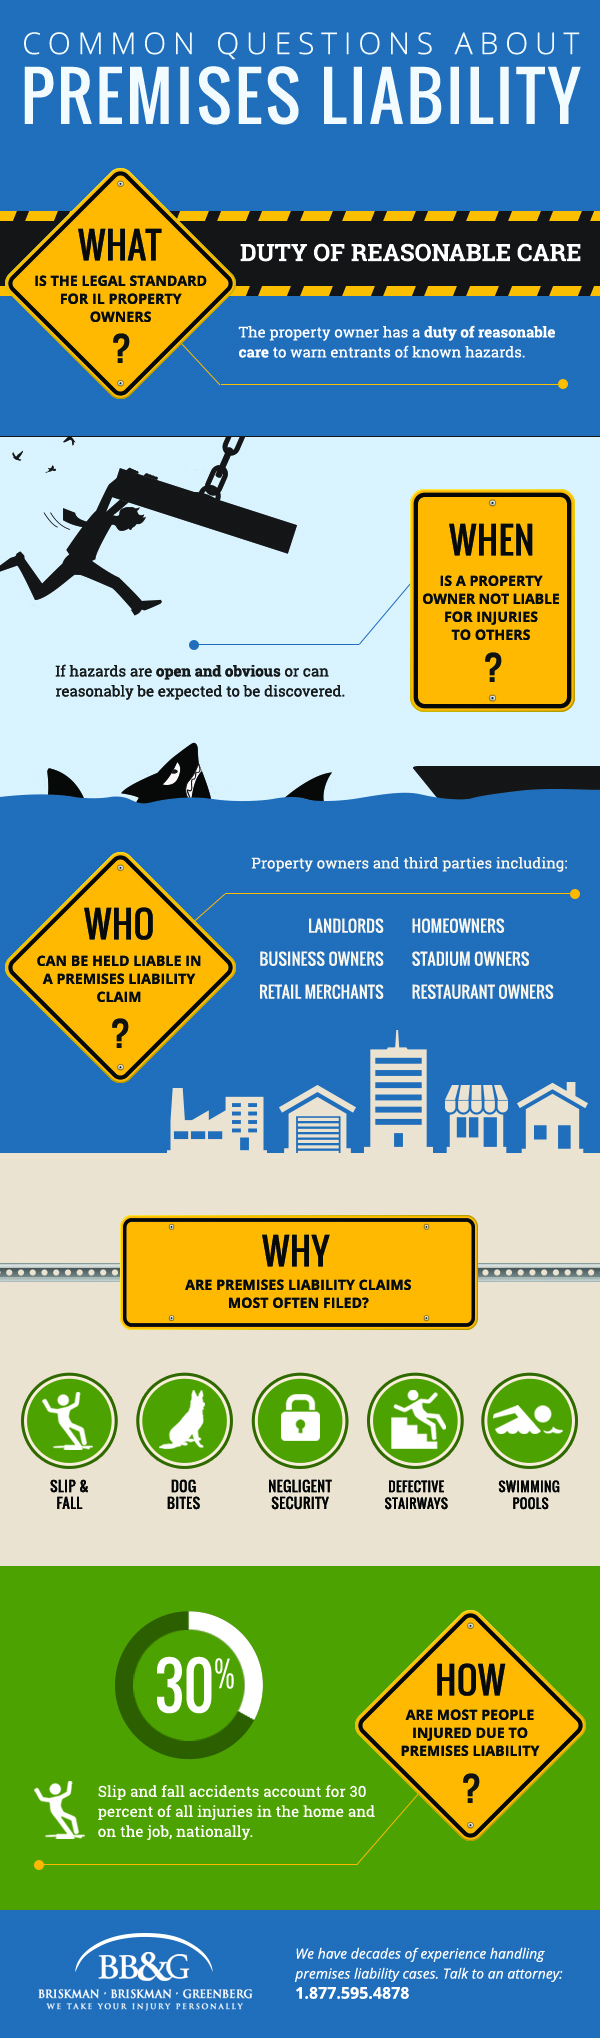 This infographic answers common Chicago premises liability questions.